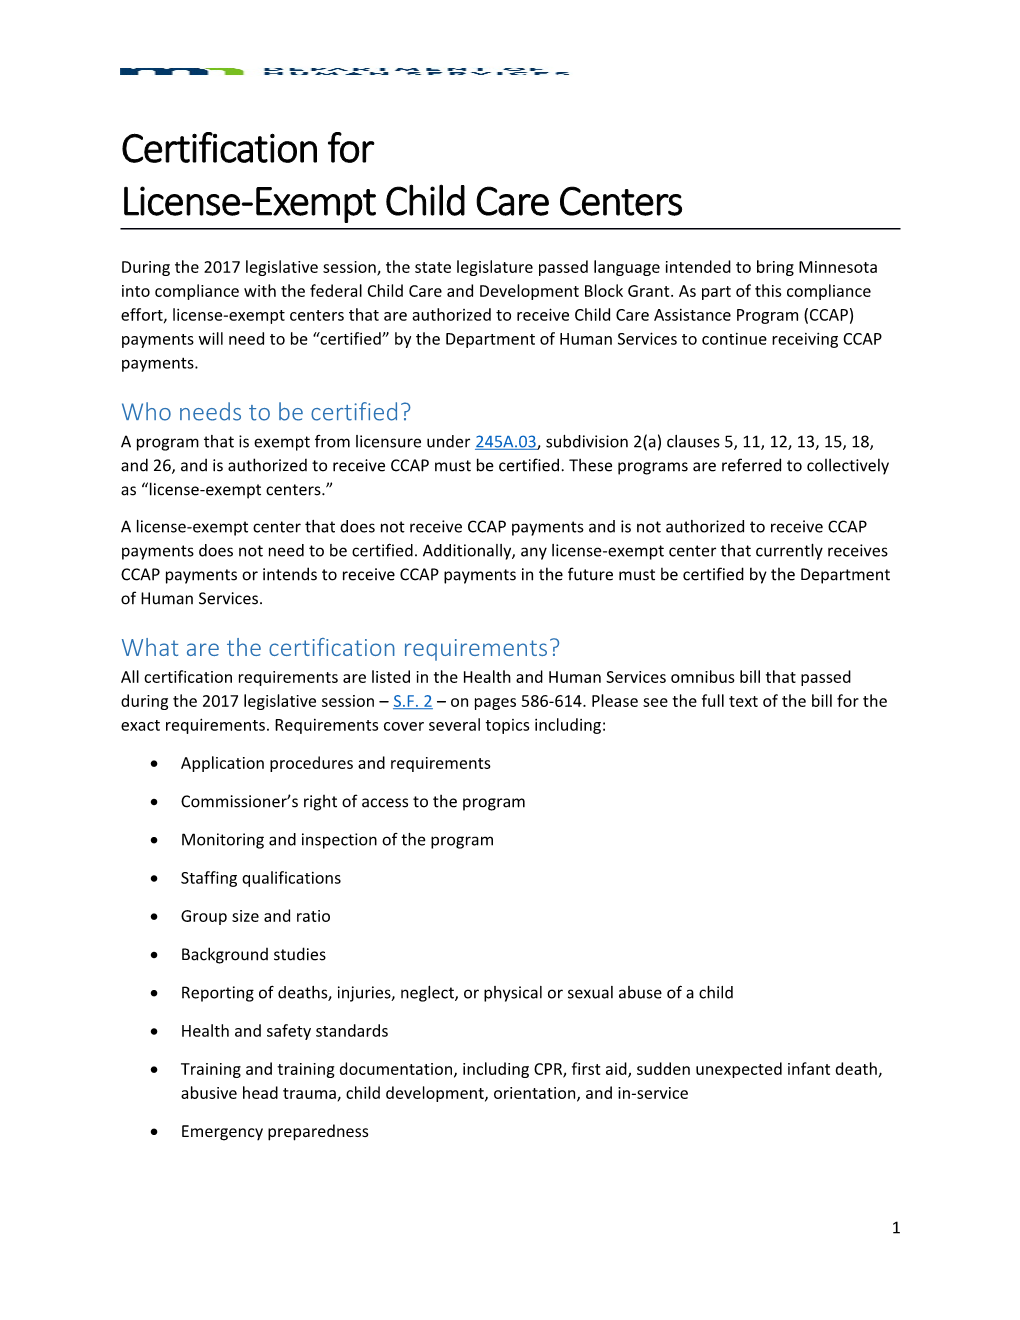 Certification for License-Exempt Child Care Centers